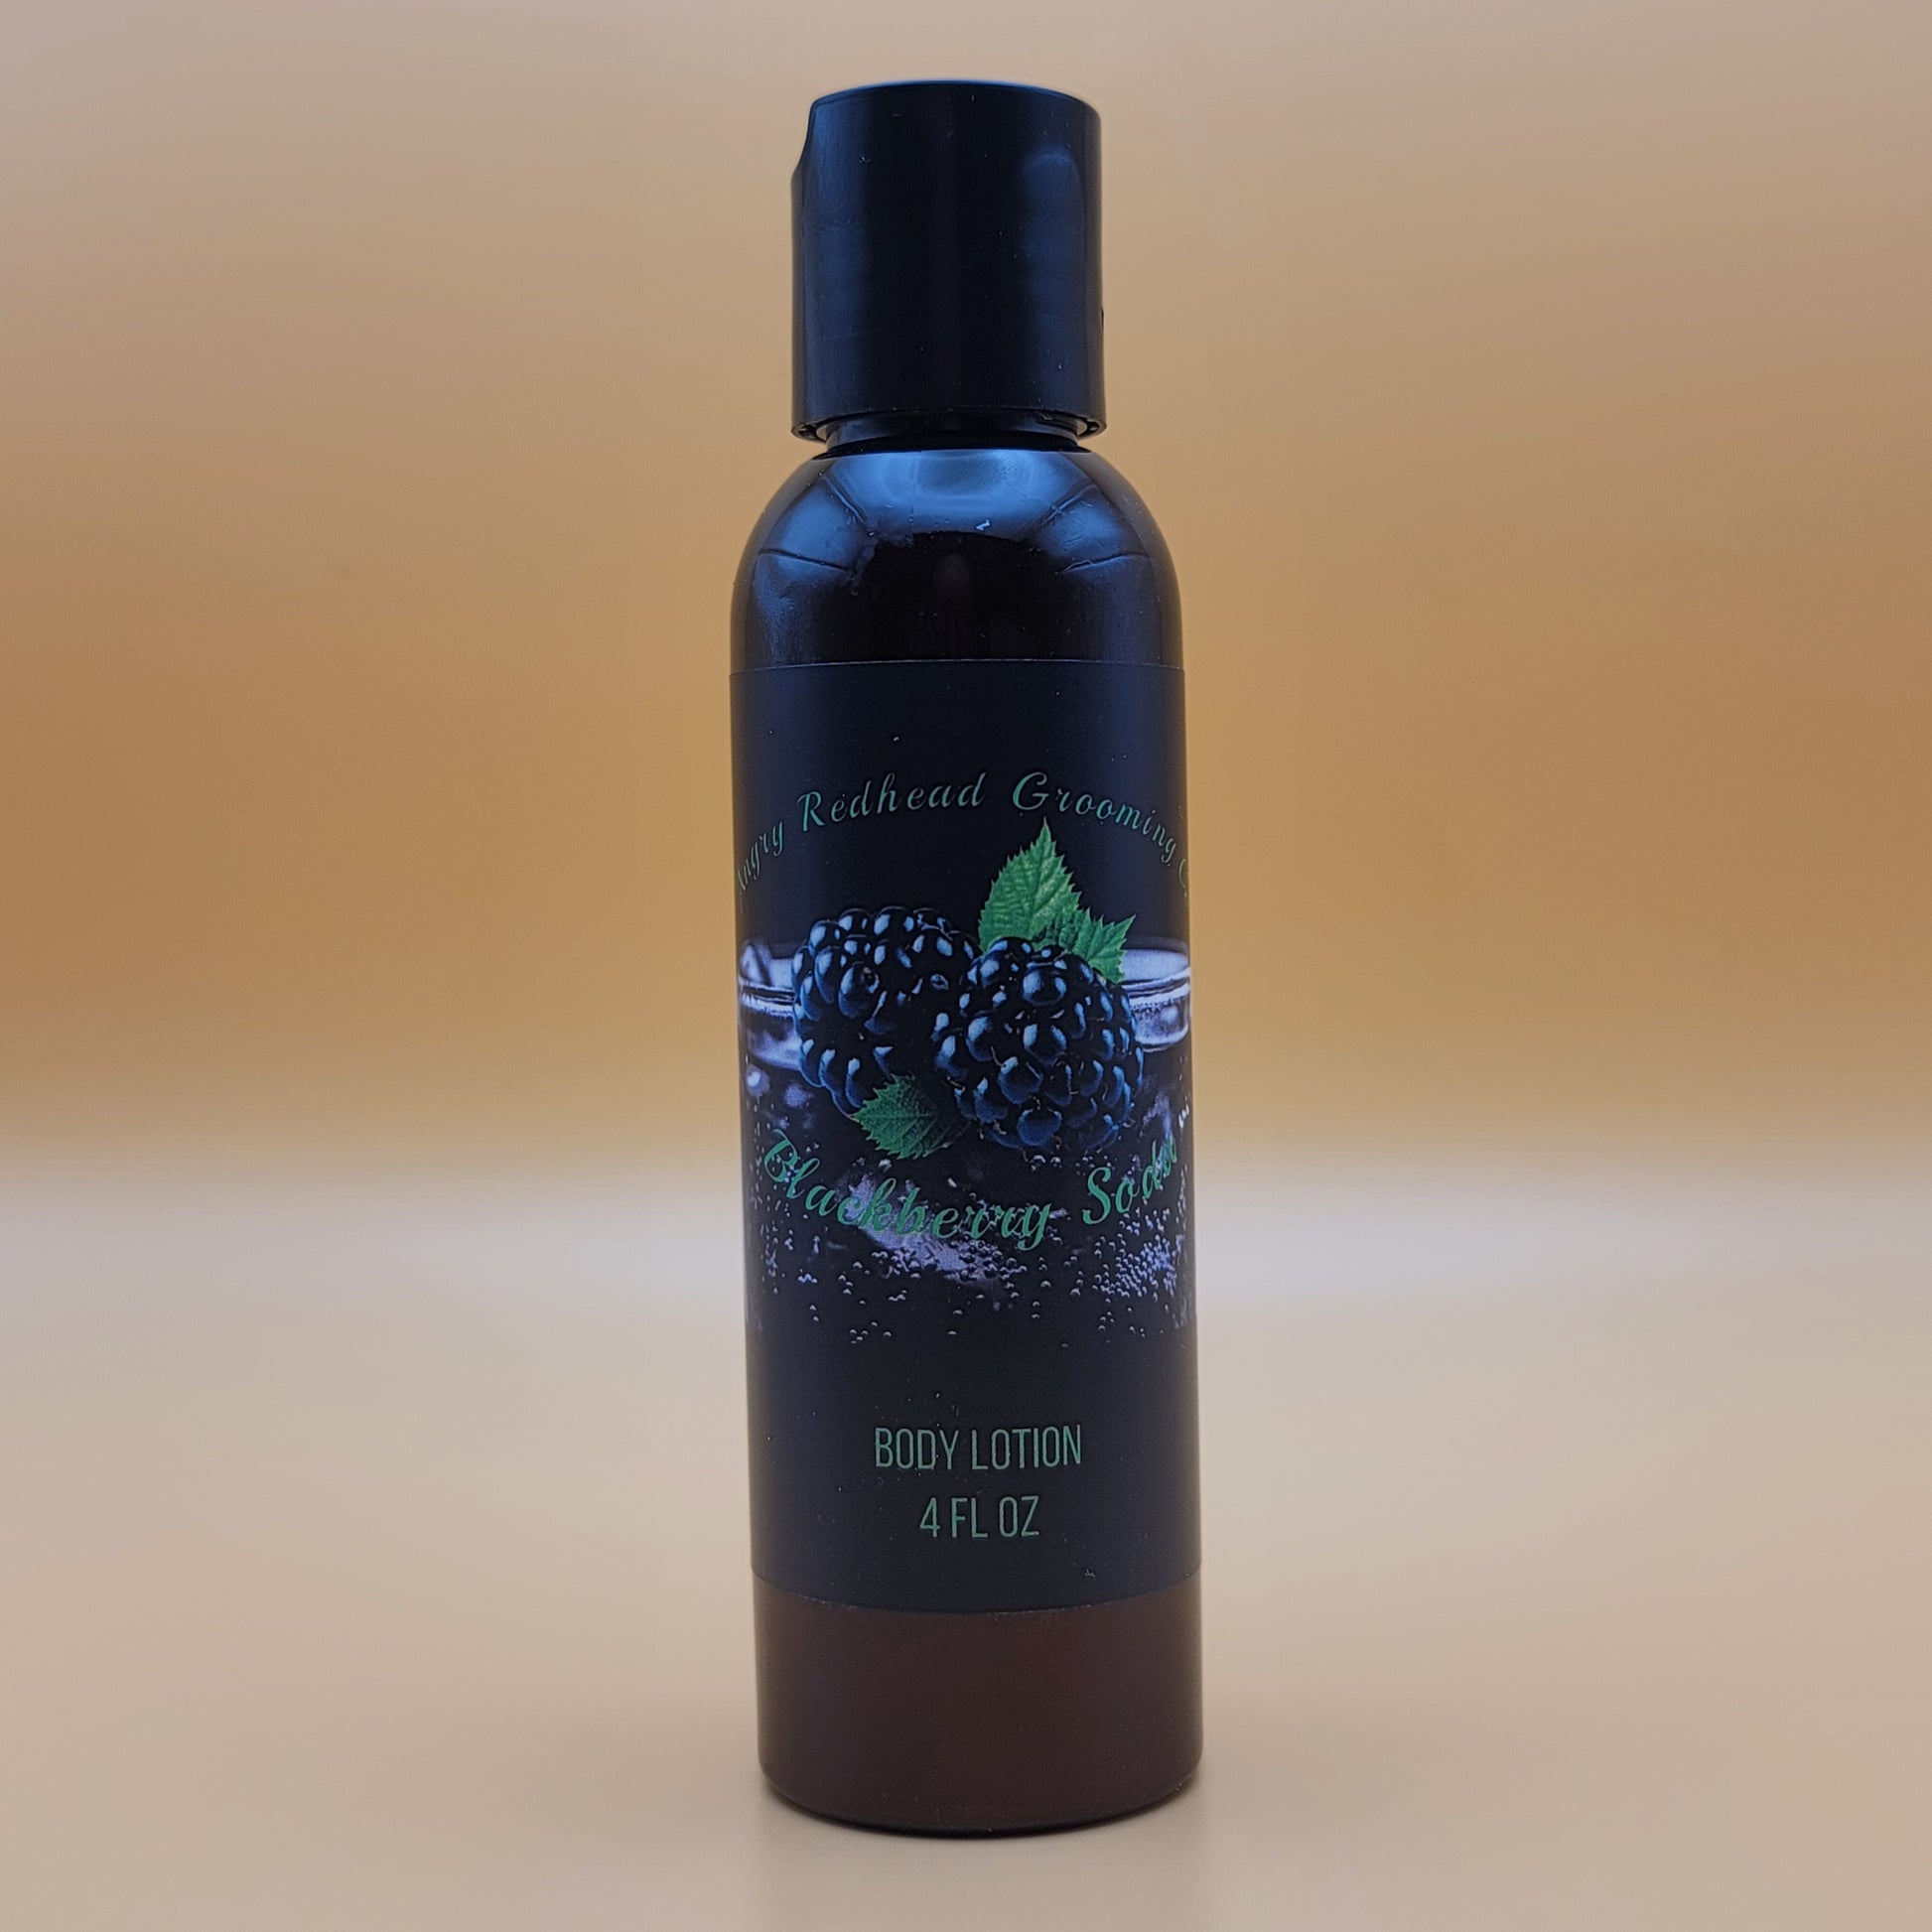 Blackberry Soda Body Lotion by Angry Redhead Grooming Co - angryredheadgrooming.com